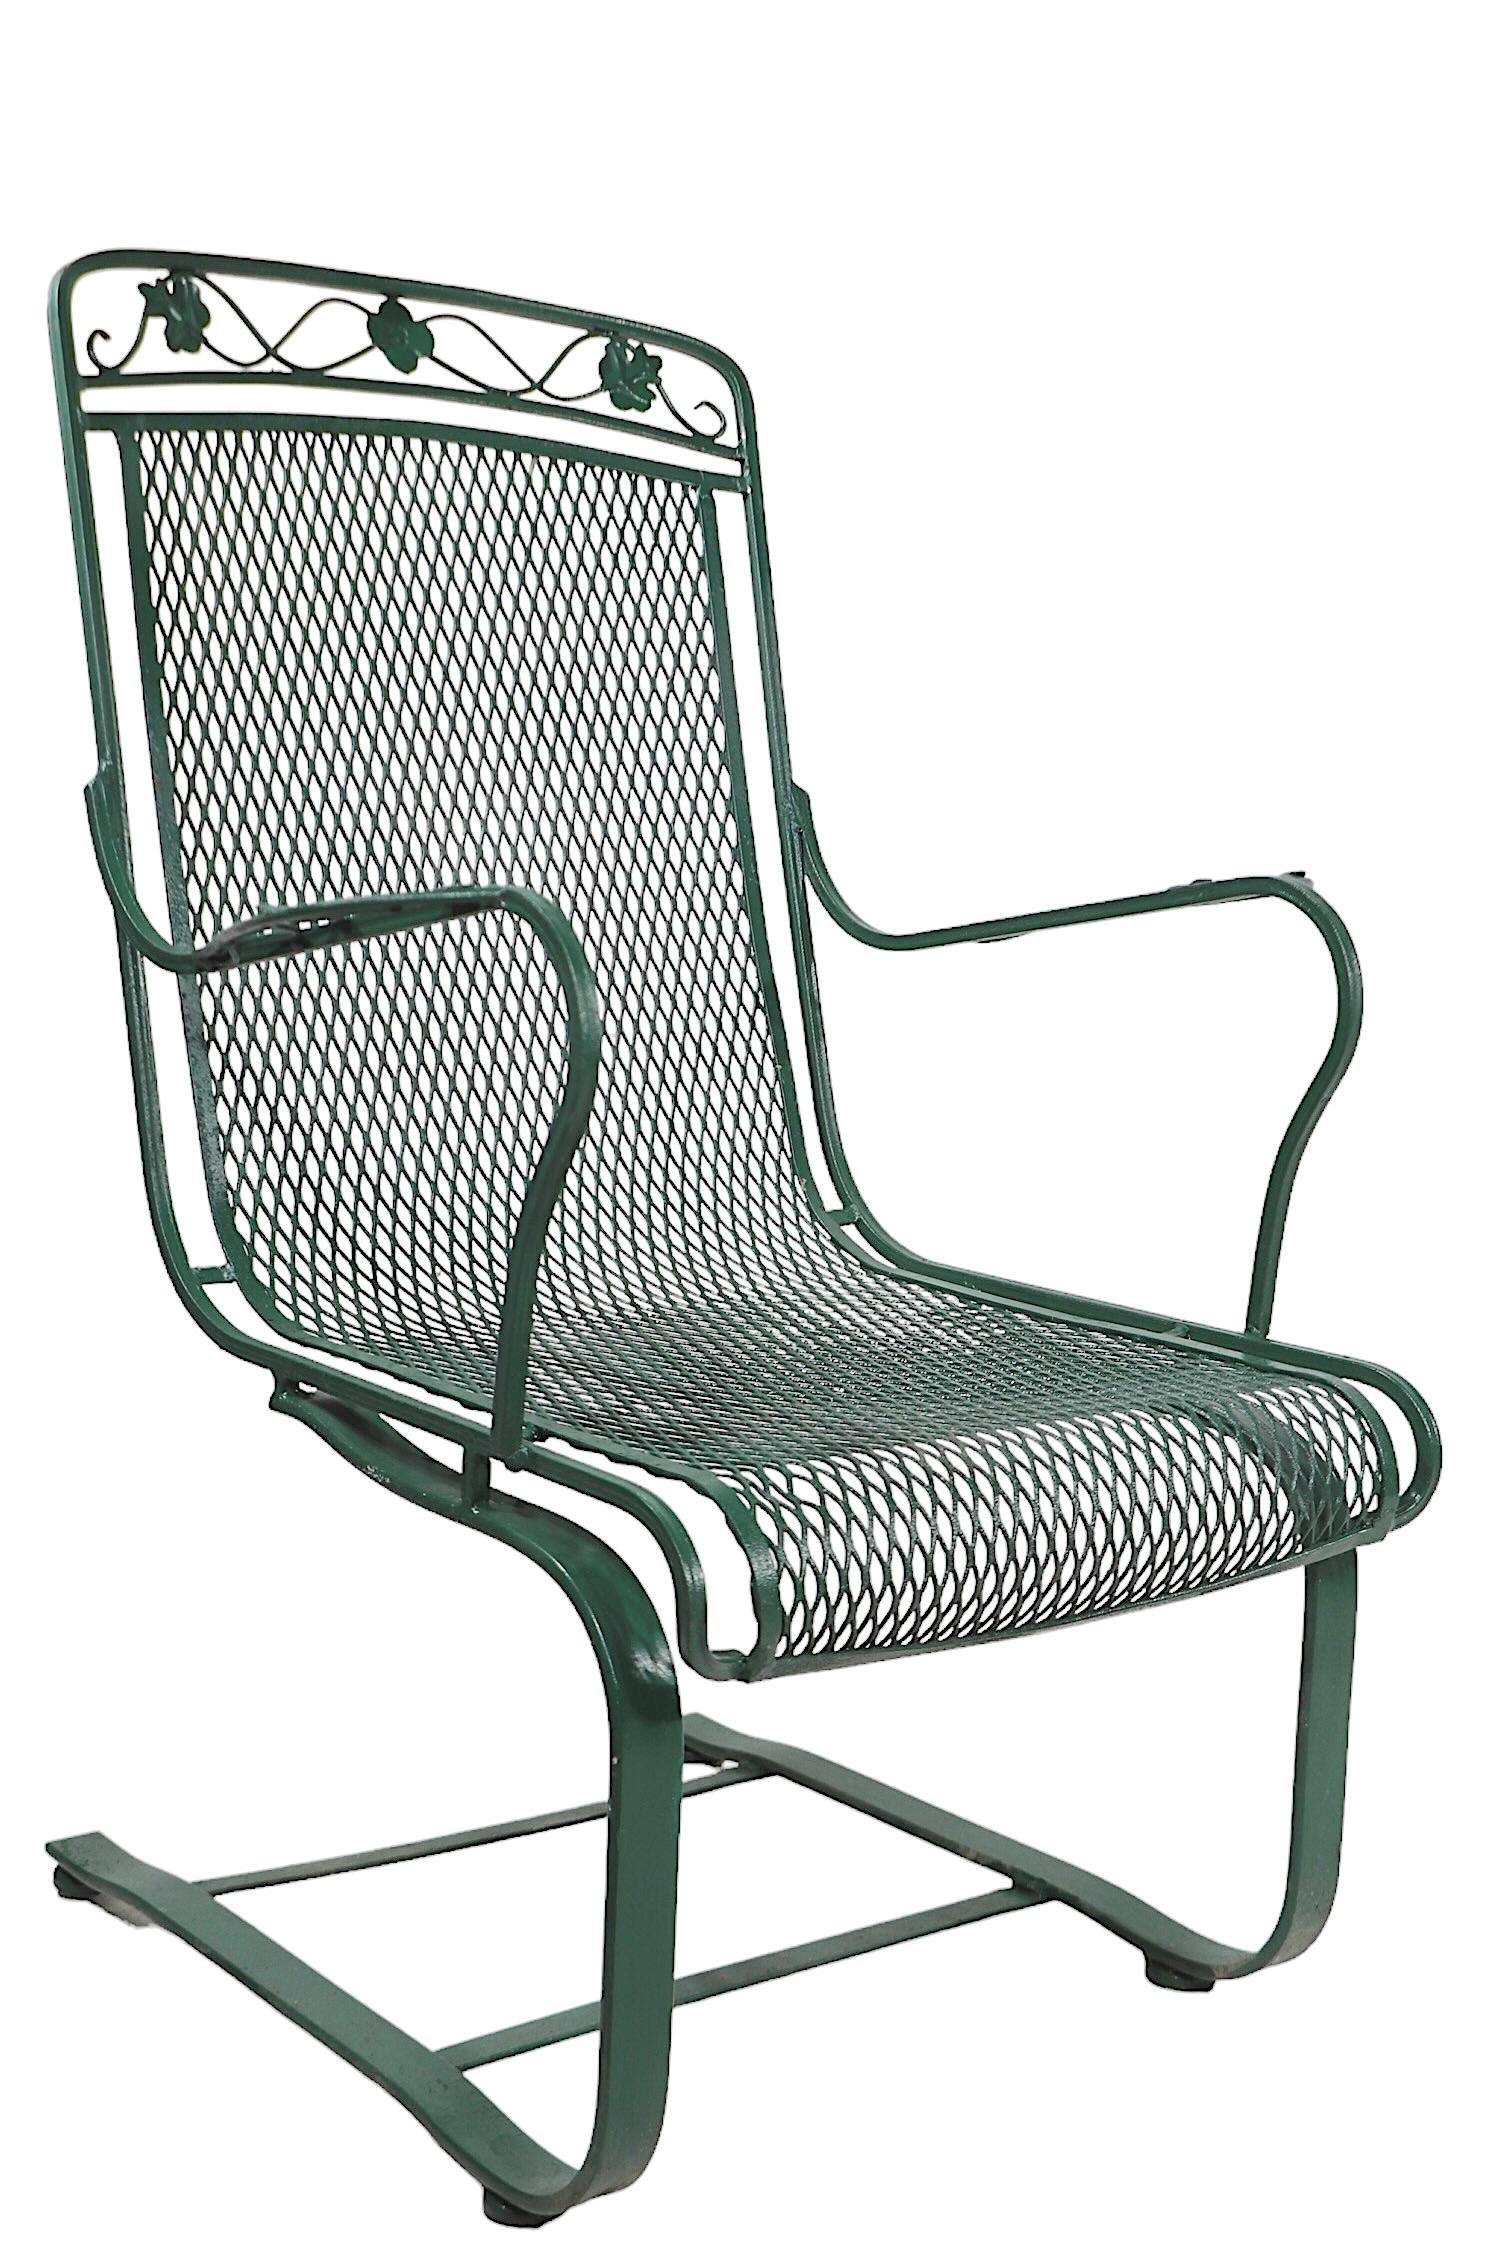 American Pr. Cantilevered  Meadowcraft Dogwood Wrought Iron Lounge Chairs  For Sale